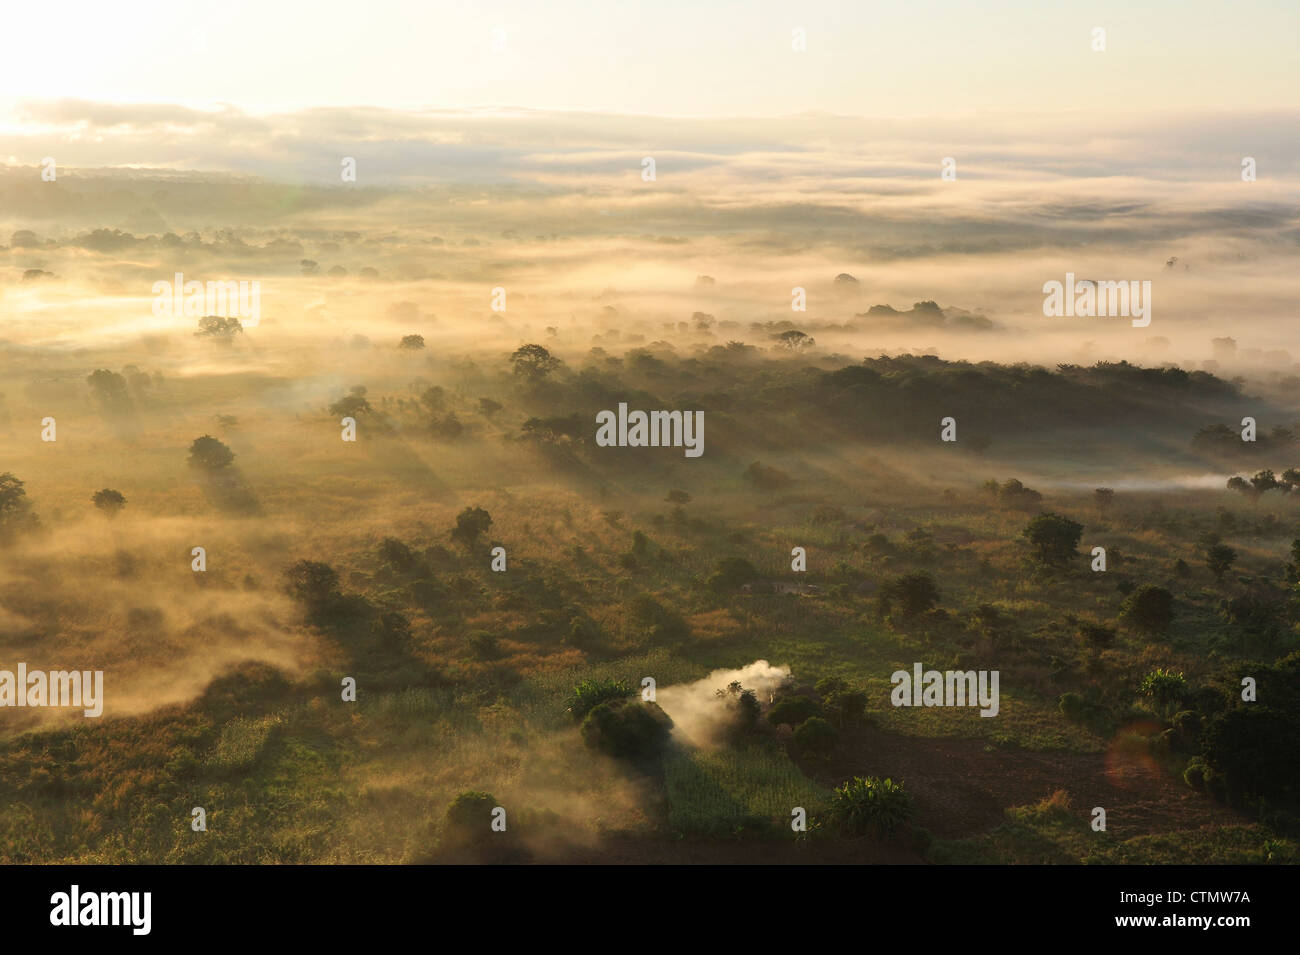 Dawn over grassland dotted with fields, encroaching mist, Central Mozambique Stock Photo